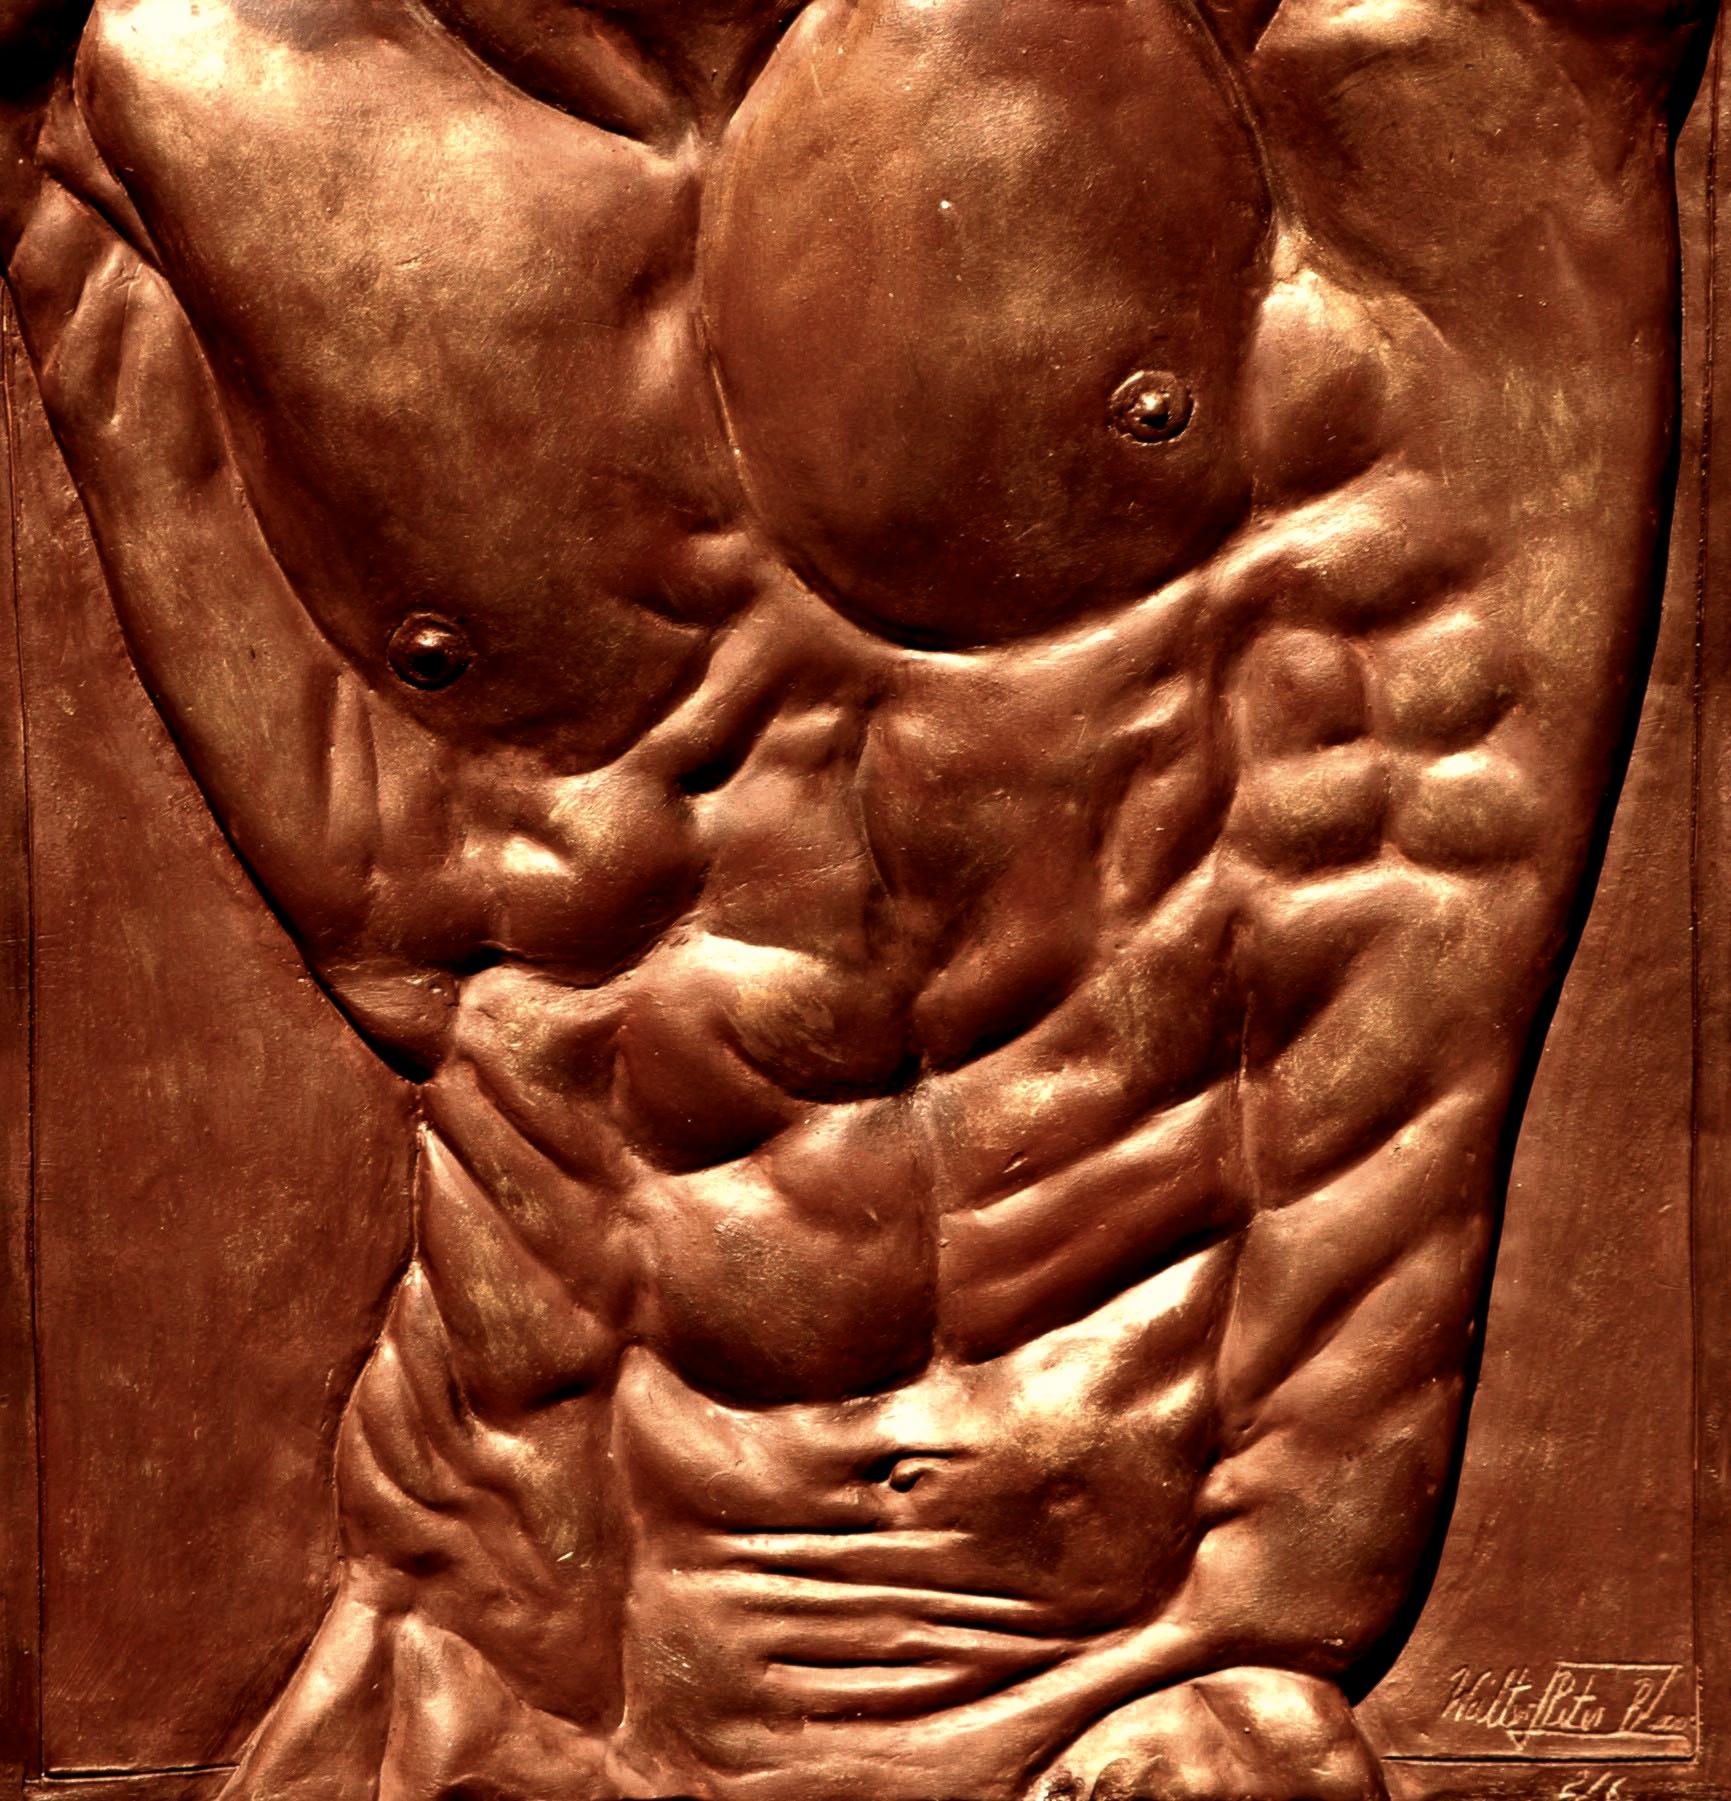 Torso of Hercules is a bronze sculpture made of brown patina made of iron nitrate and wax finish. sculpture by contemporary artist Walter Peter Brenner, dimensions are 38 × 38 × 3 cm (15 × 15 × 1.2 in). 
The sculpture is signed and numbered, comes